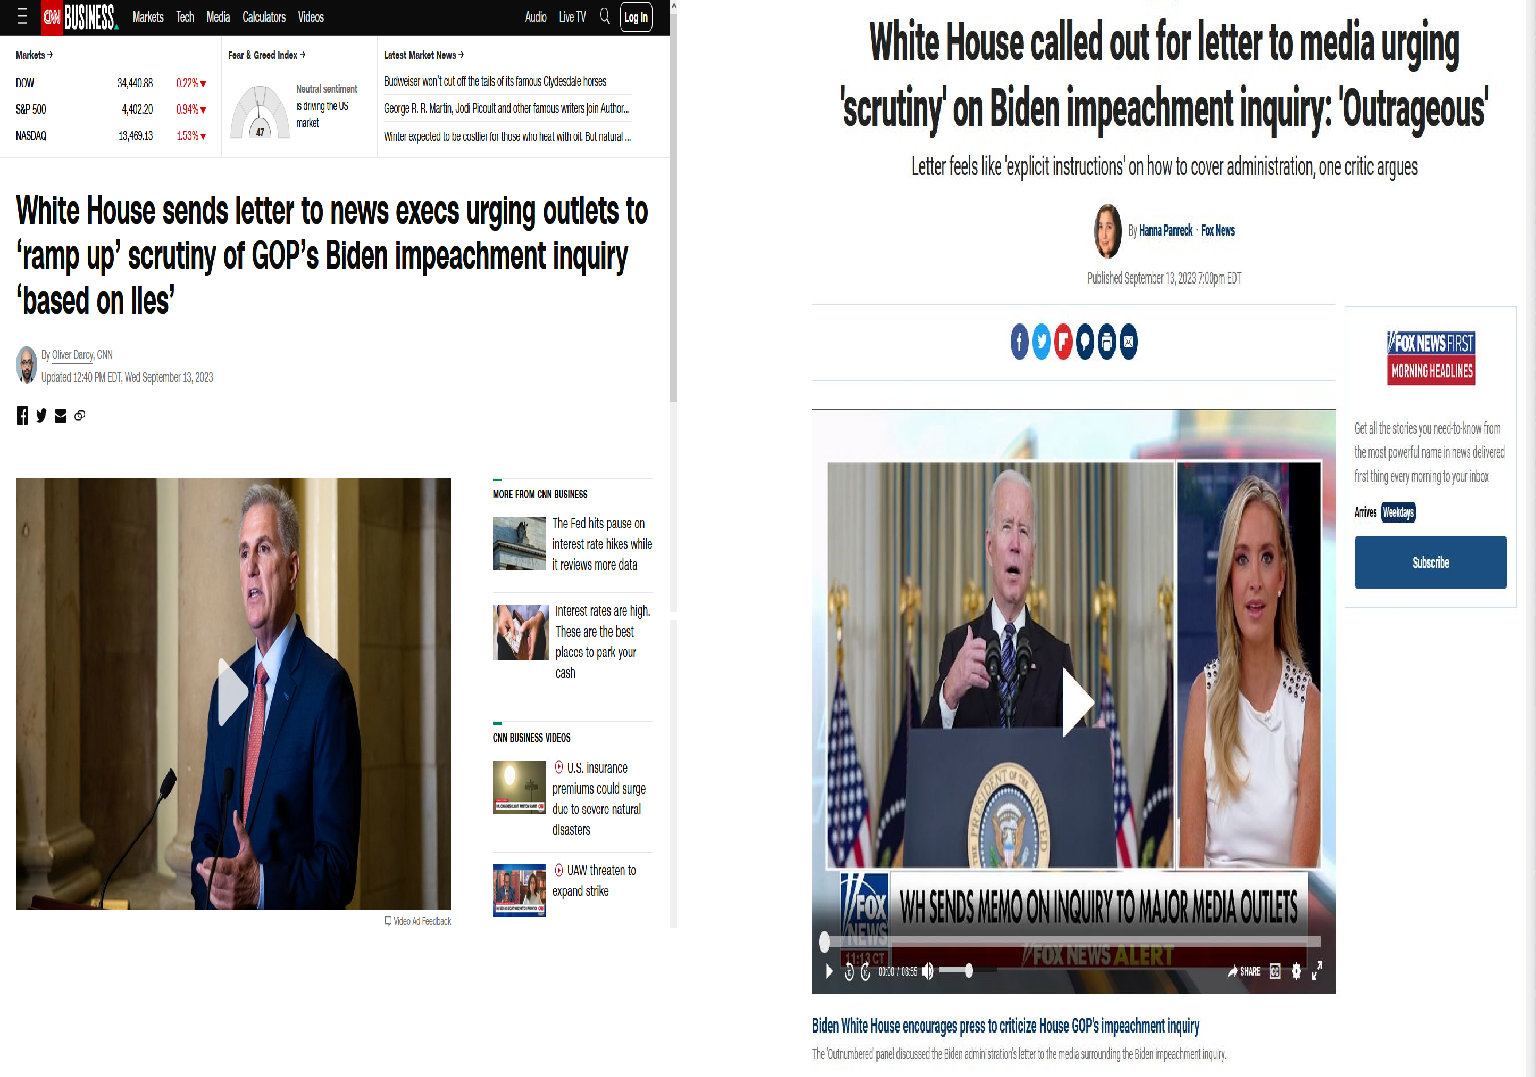 This is a screenshot of the CNN and Fox News articles pertaining to the memo sent from the White House regarding the impeachment inquiry of President Biden